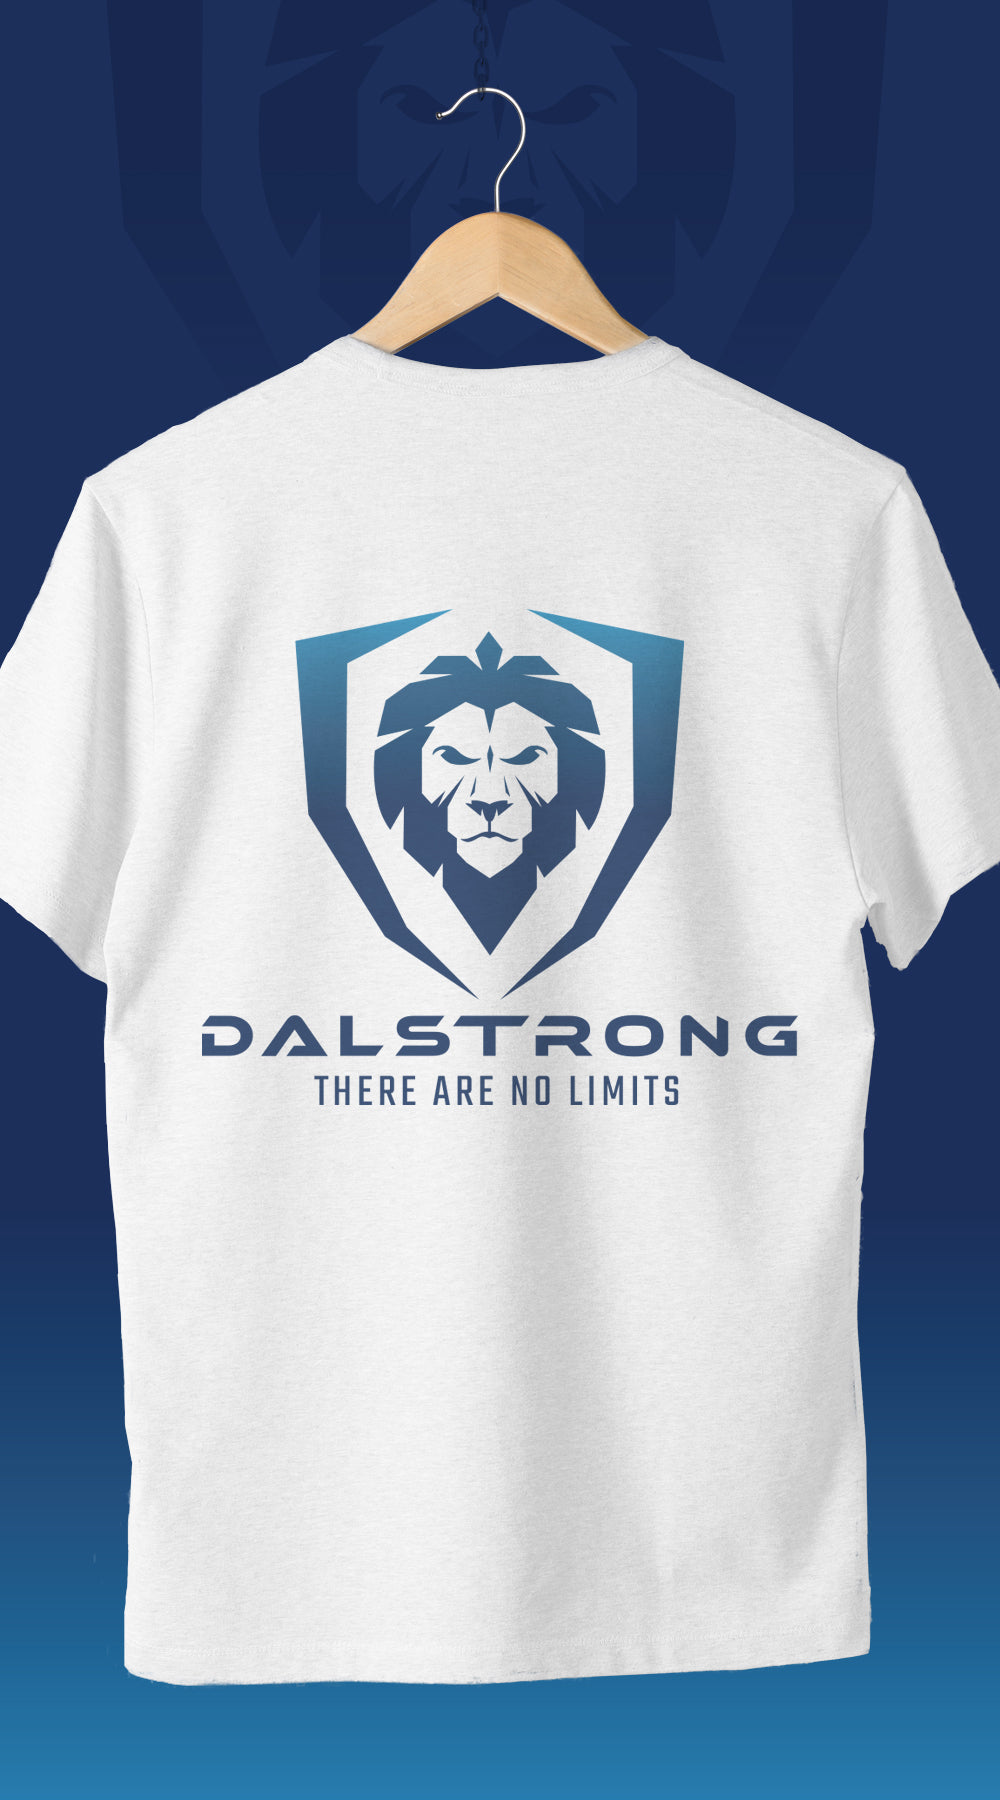 Dalstrong no limits youth dalstrong basic tee white back design with name and logo.